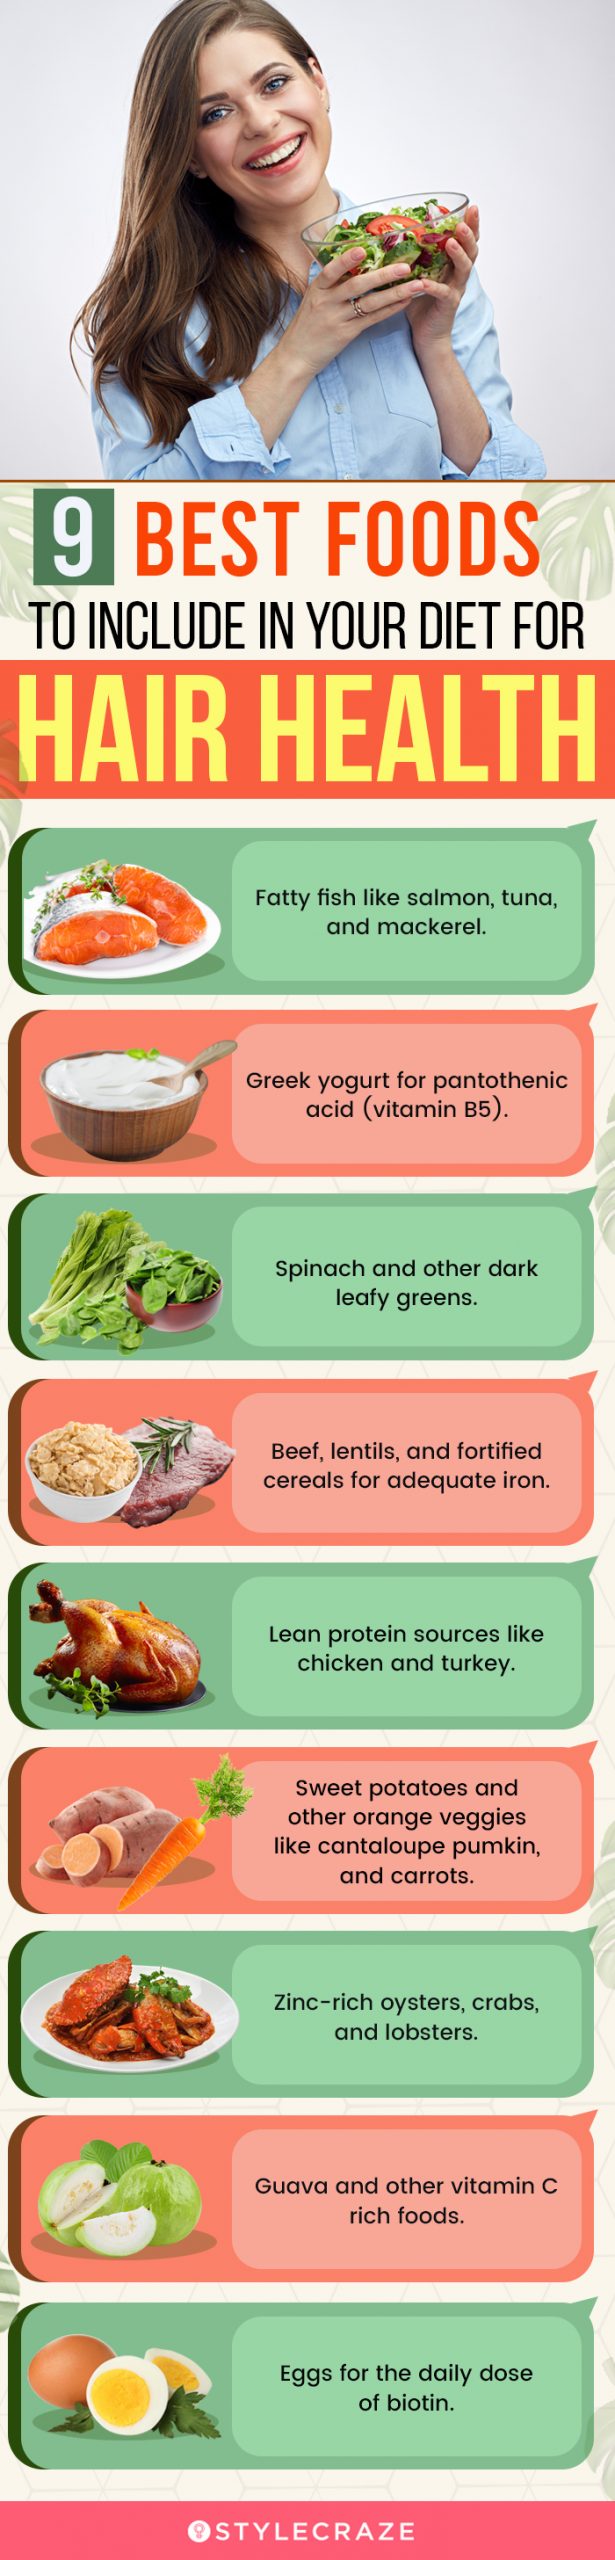 9 best foods to include in your diet for hair health [infographic]